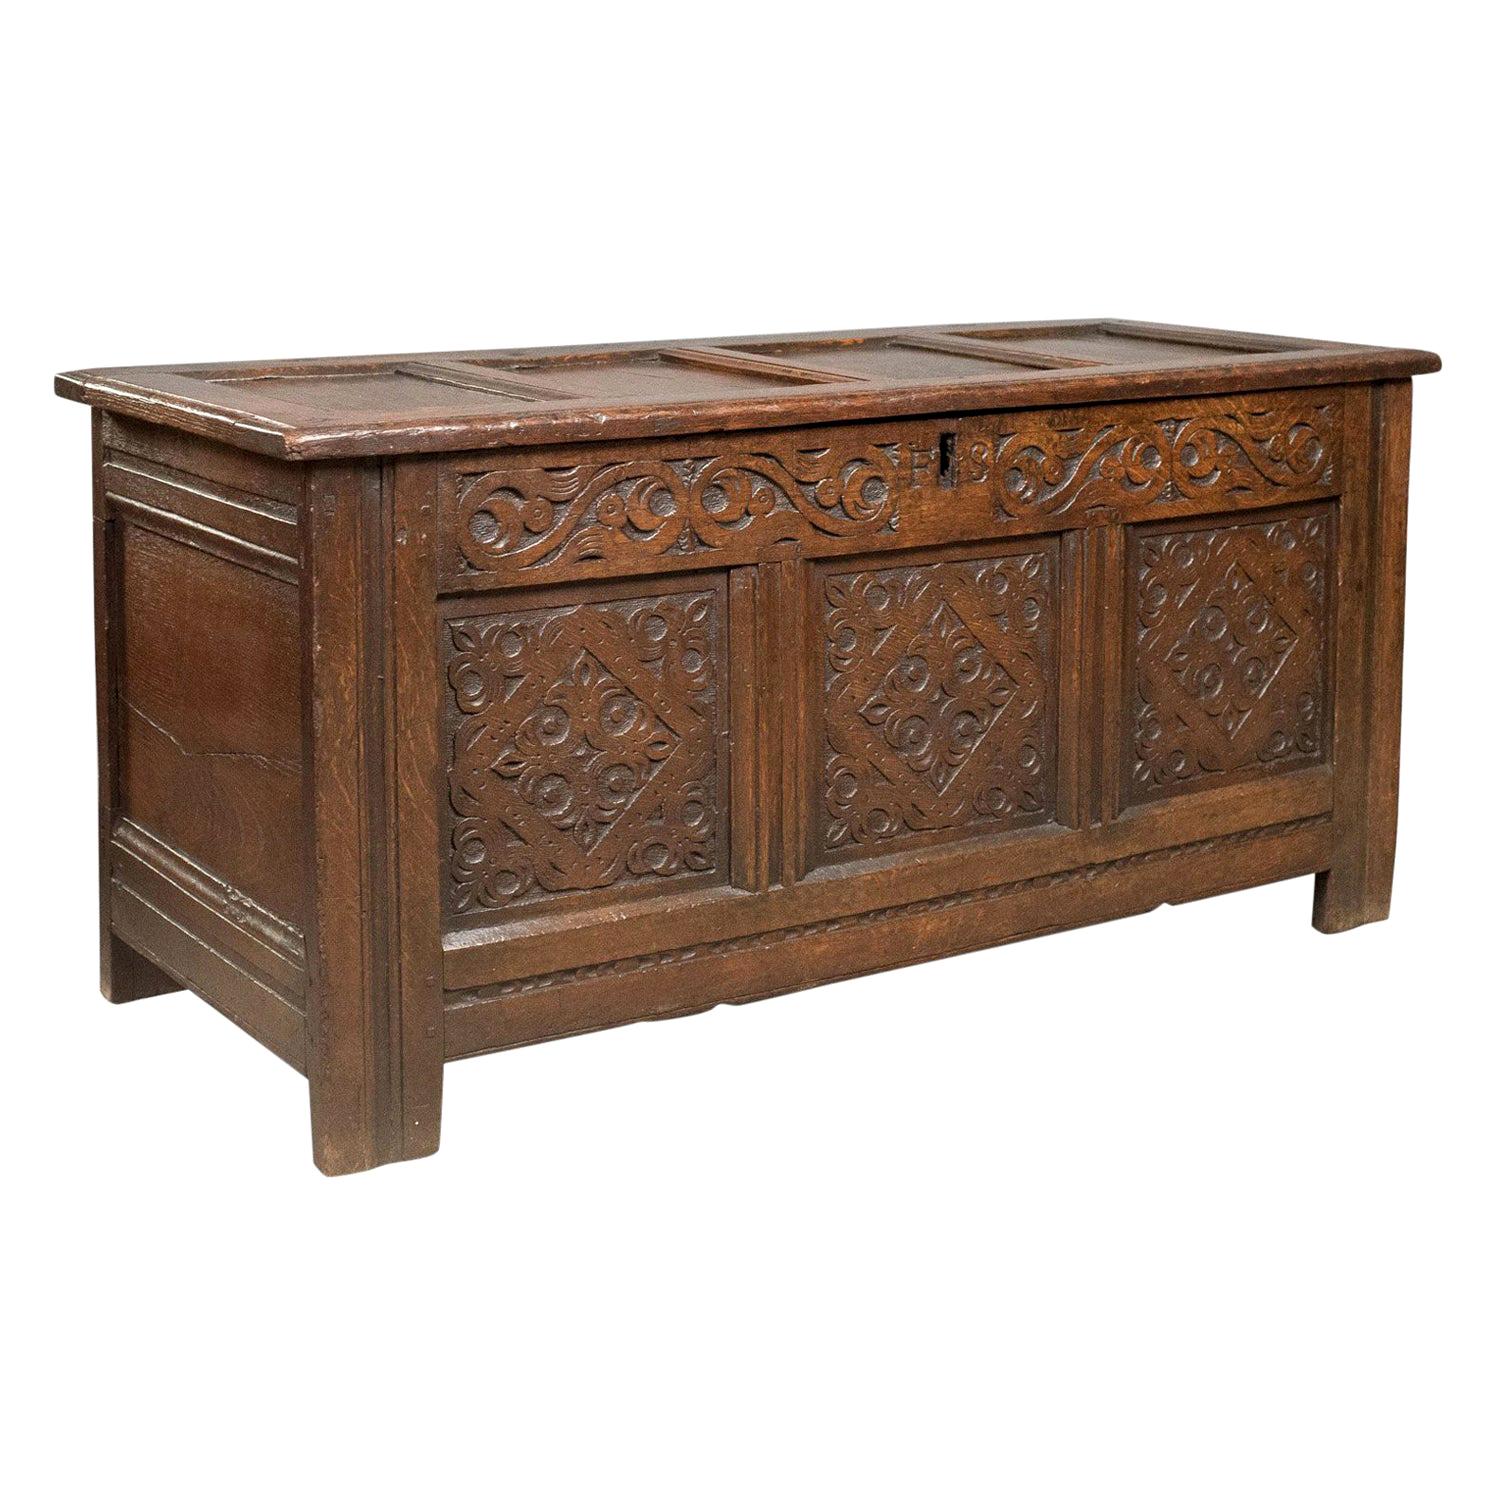 Carved Antique Coffer, English Oak Joined Chest, Trunk, circa 1700